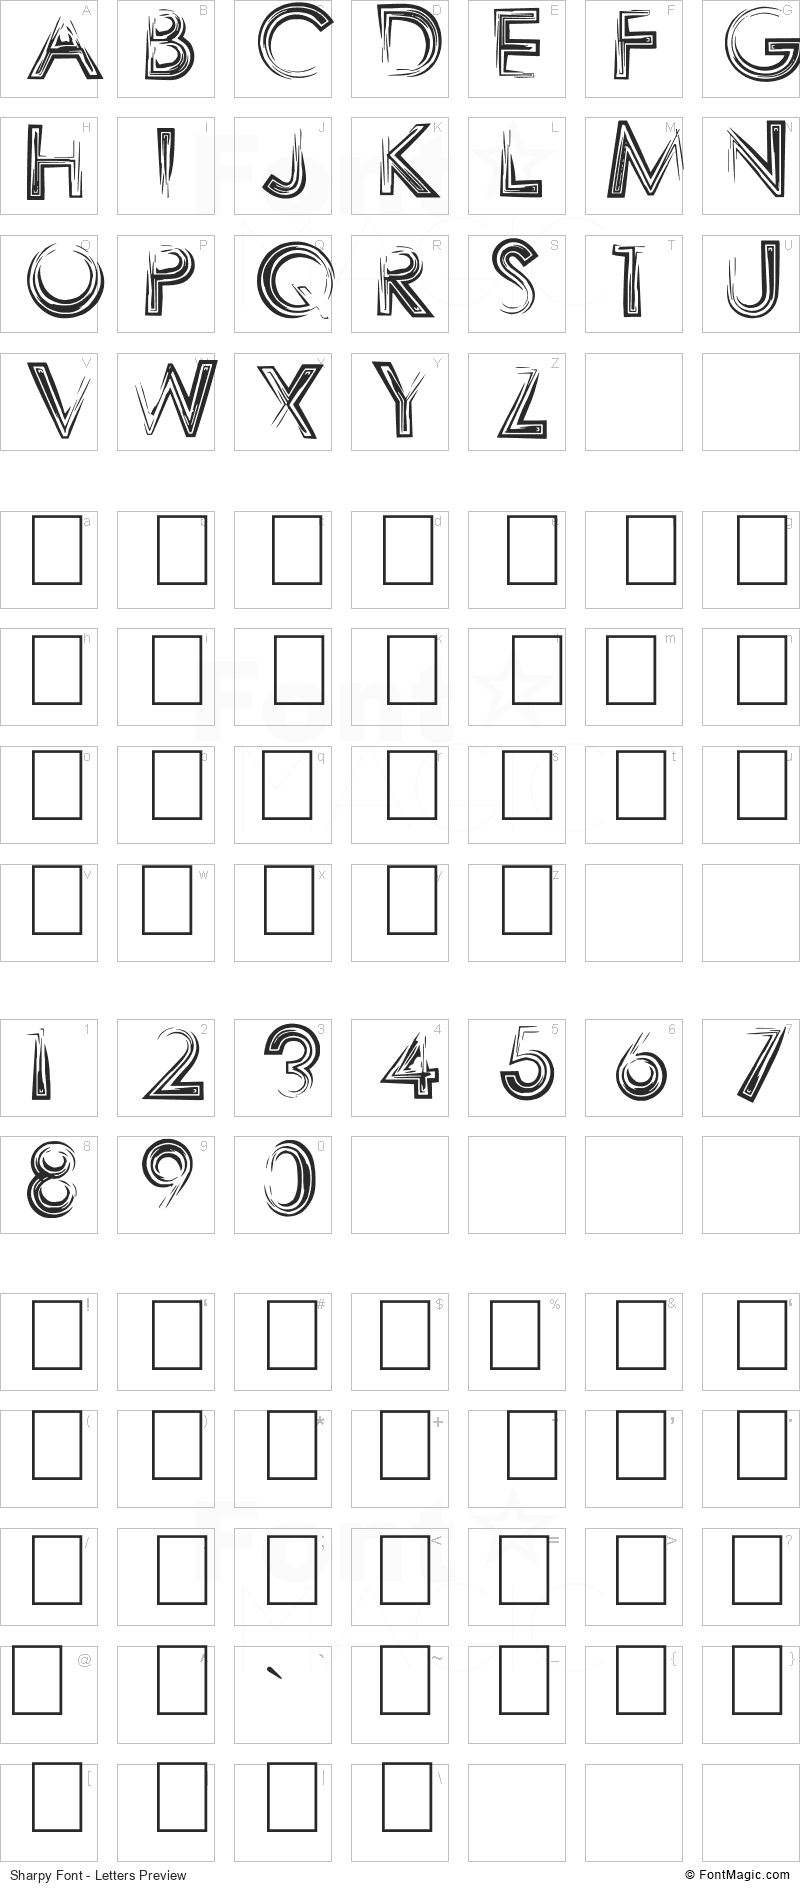 Sharpy Font - All Latters Preview Chart